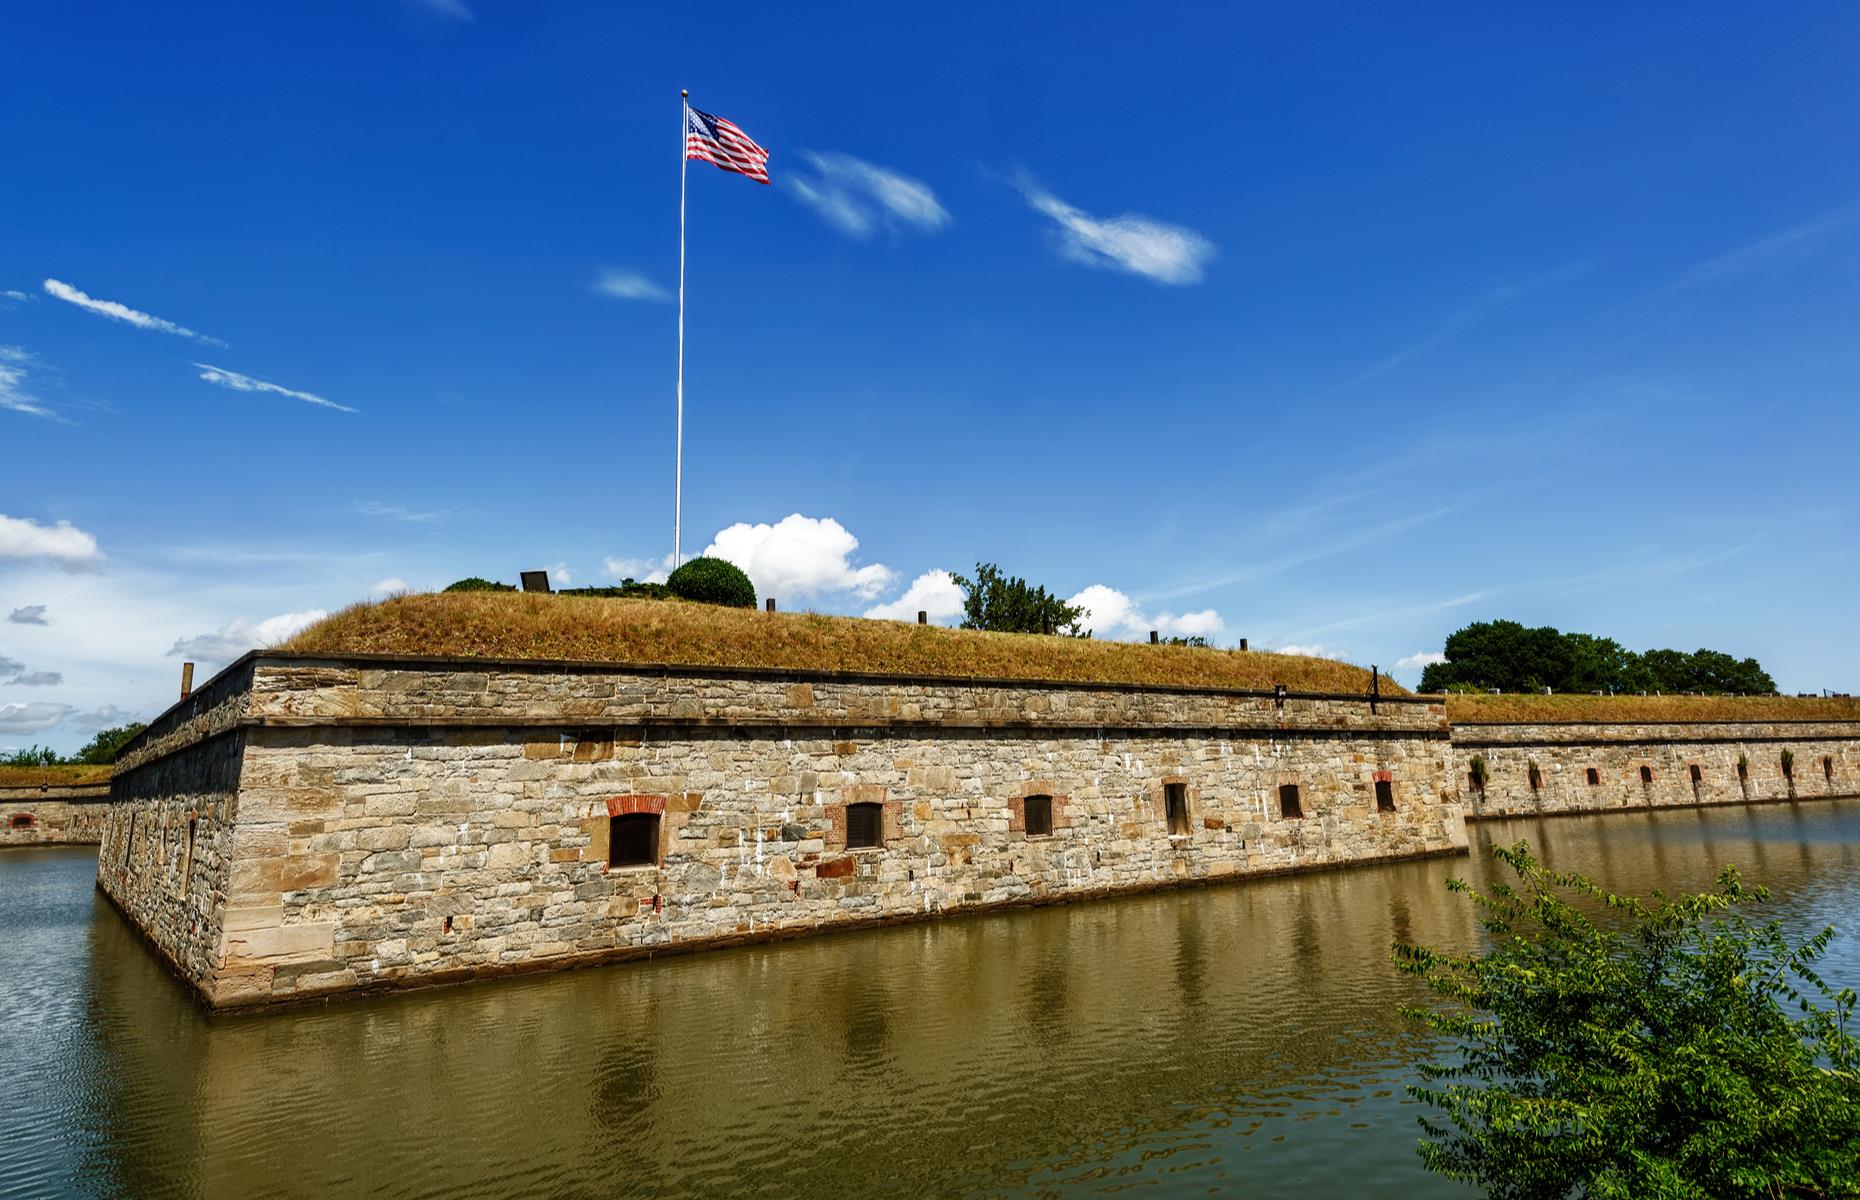 <p>Another hulking military structure, Fort Monroe watches over the shores of southeastern Virginia, and has done so since 1834. Though Virginia was controlled by the Confederacy during the Civil War, Monroe itself was a Union stronghold and numerous enslaved peoples escaped to the fort during the conflict – as such it became known as Freedom’s Fortress. Today the Casemate Museum chronicles the structure’s history, while nature trails criss-cross its lush surrounds.</p>